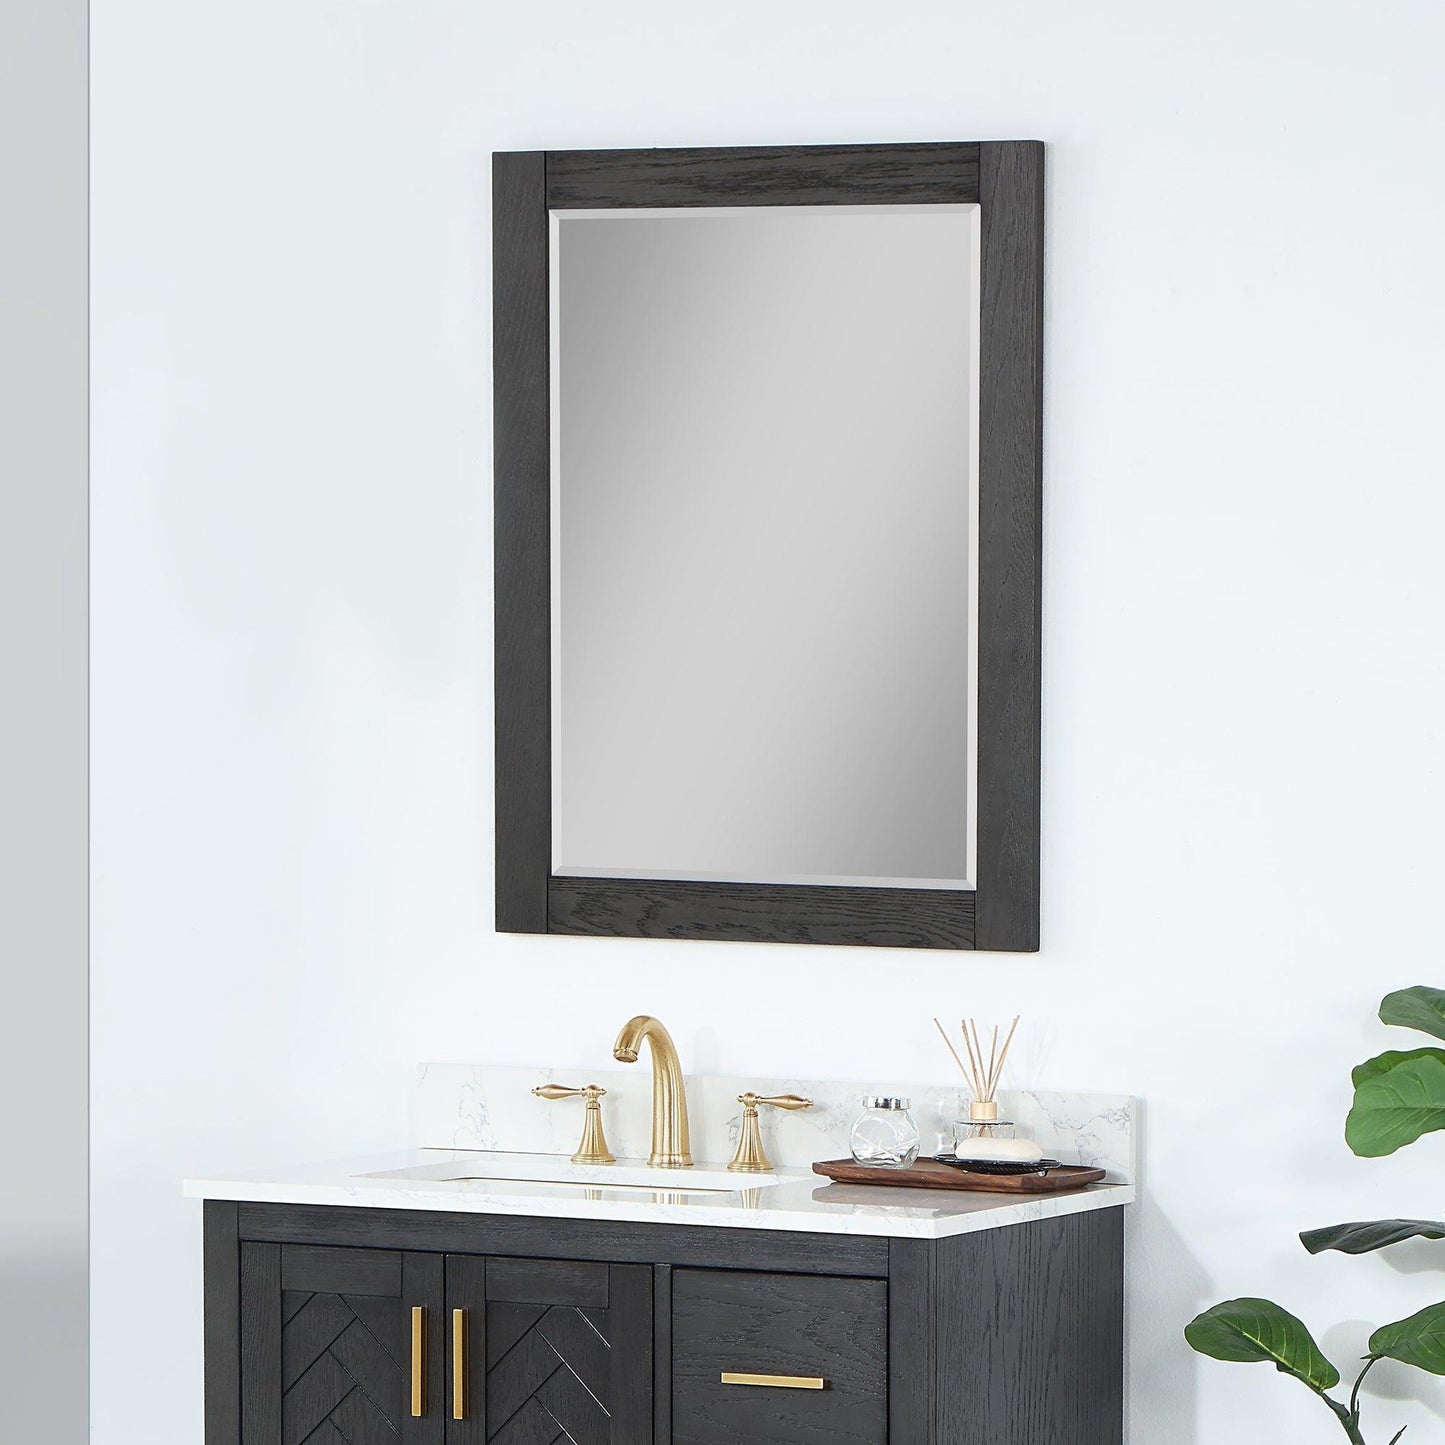 Altair Ivy 27" x 36" Rectangle Brown Oak Wood Framed Wall-Mounted Mirror